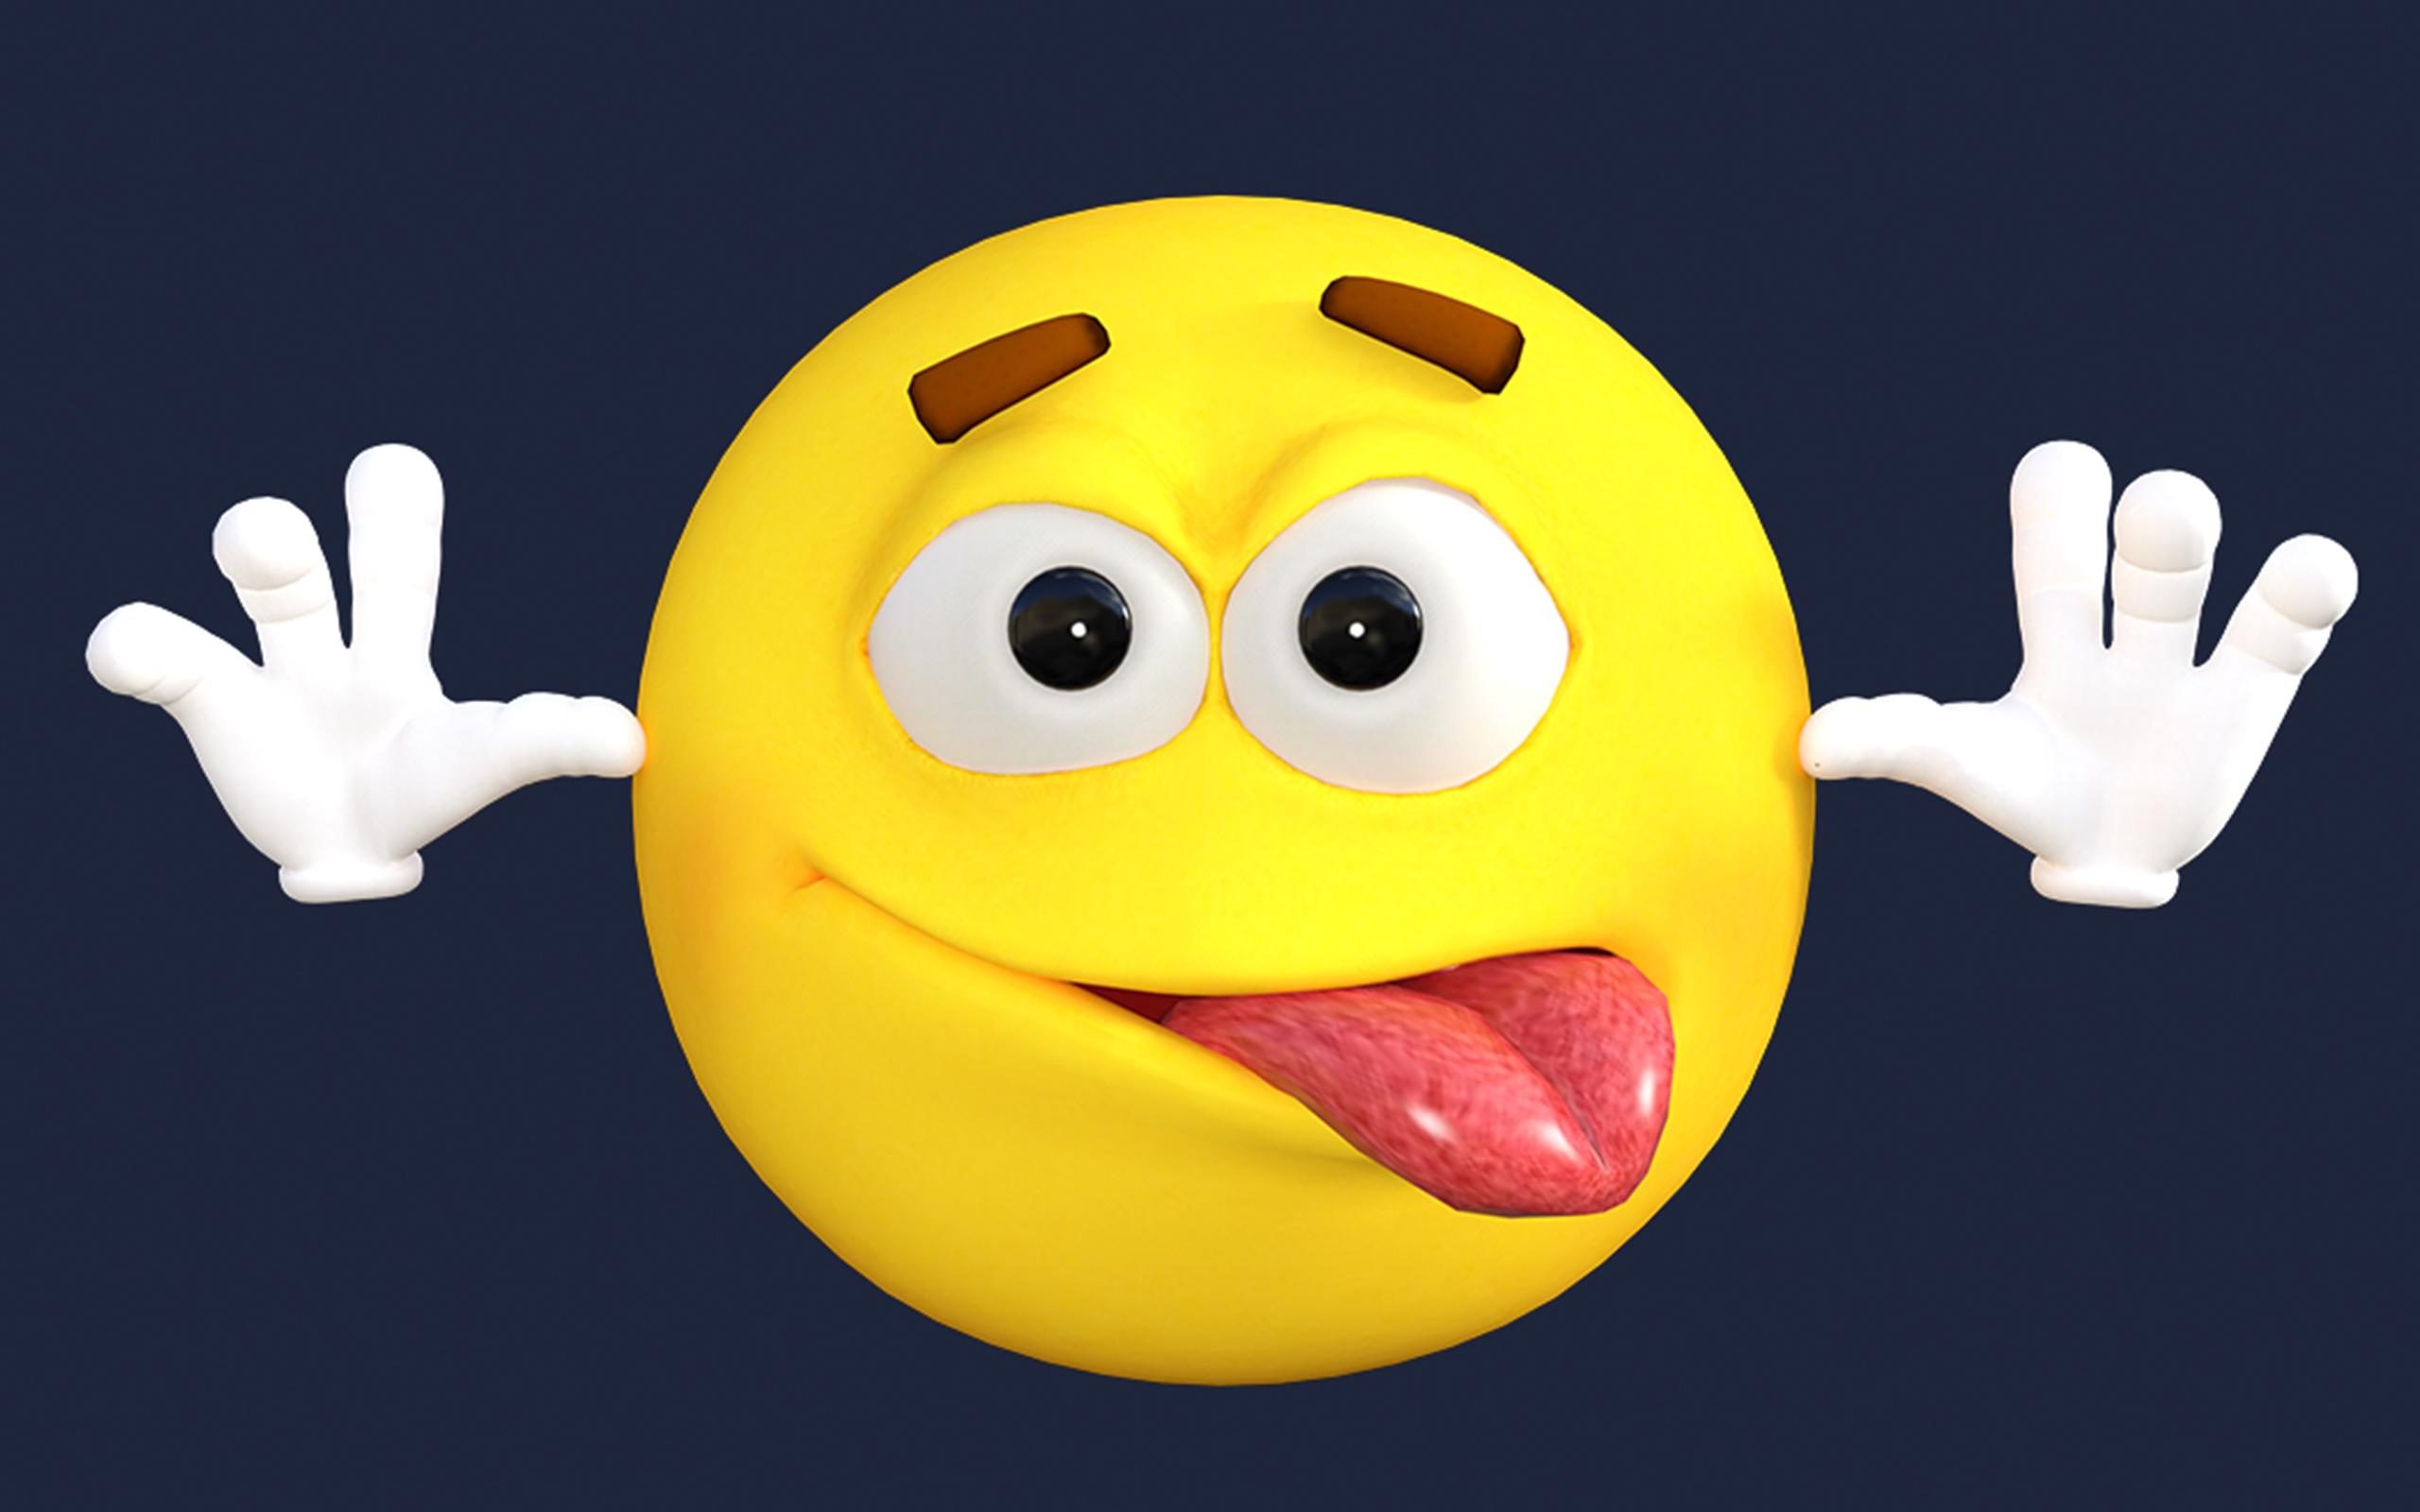 Emoji Wallpapers for Android - APK Download